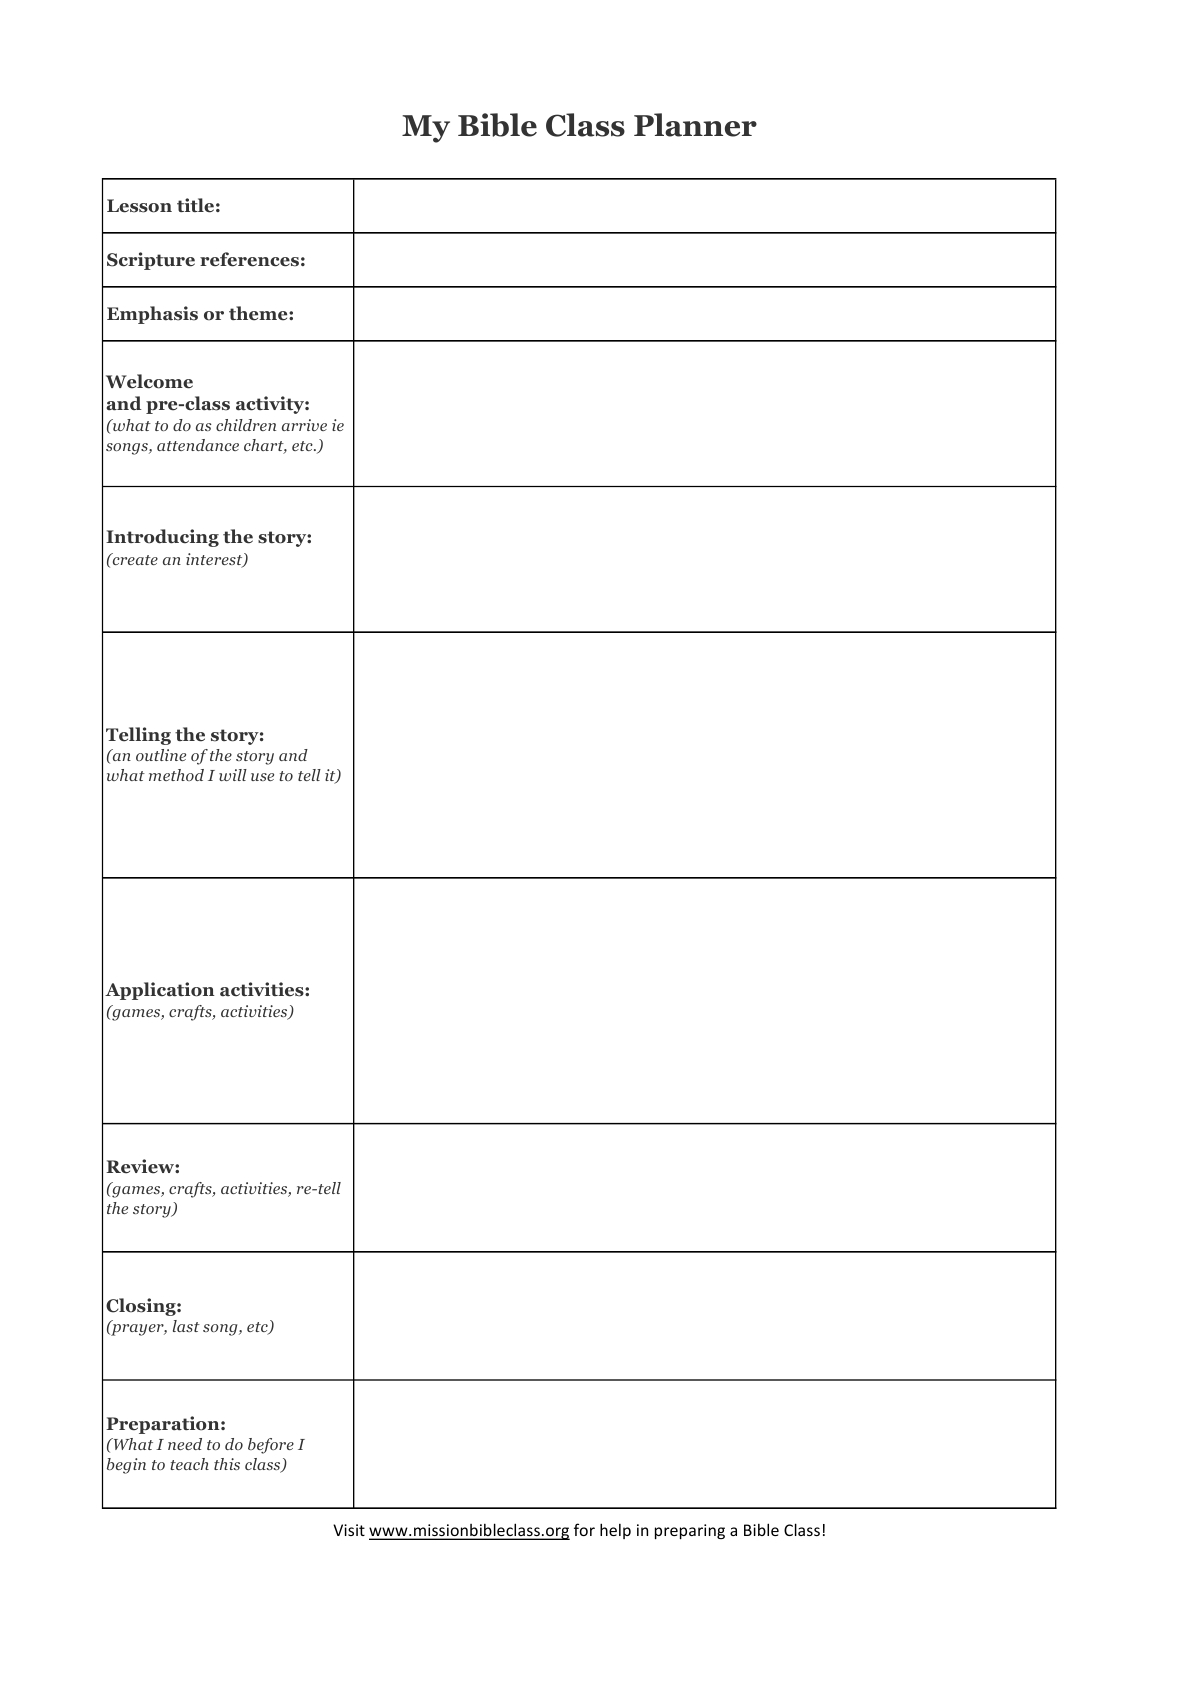 Blank Lesson Plan Templates To Print | Esl Teaching Material | Blank - Free Printable Sunday School Lessons For Youth